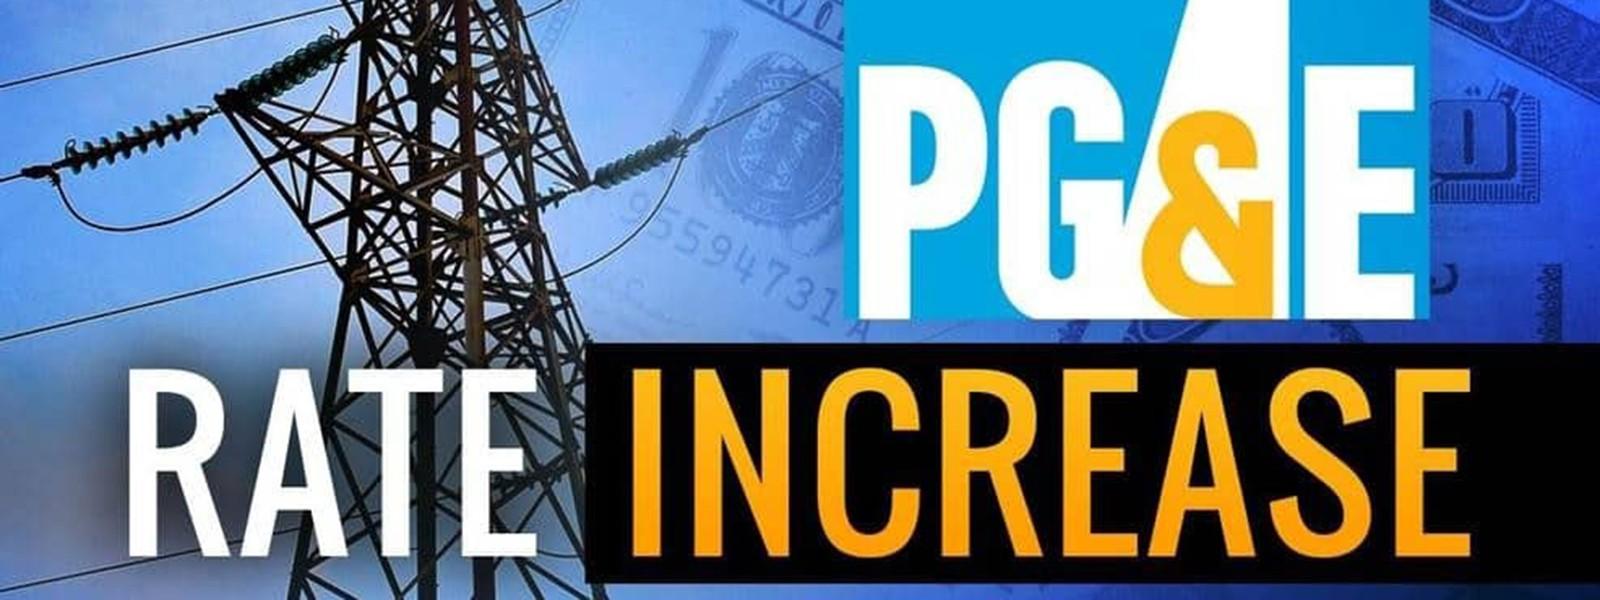 Combating Ever-Rising PG&E Rates